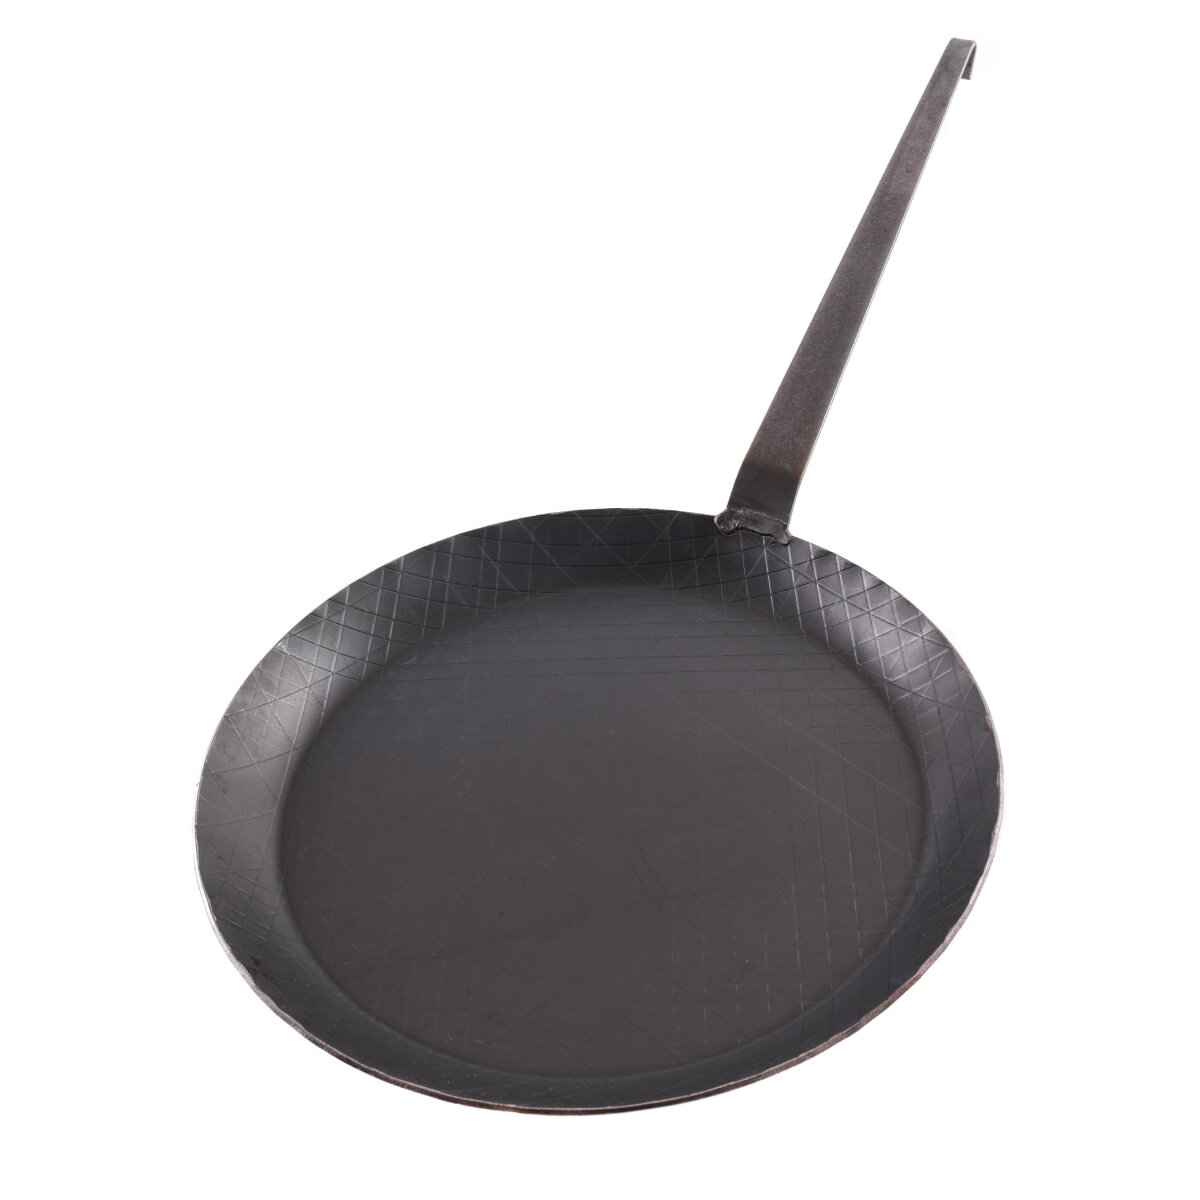 Frying pan with forged hook handle, approx. 40 cm